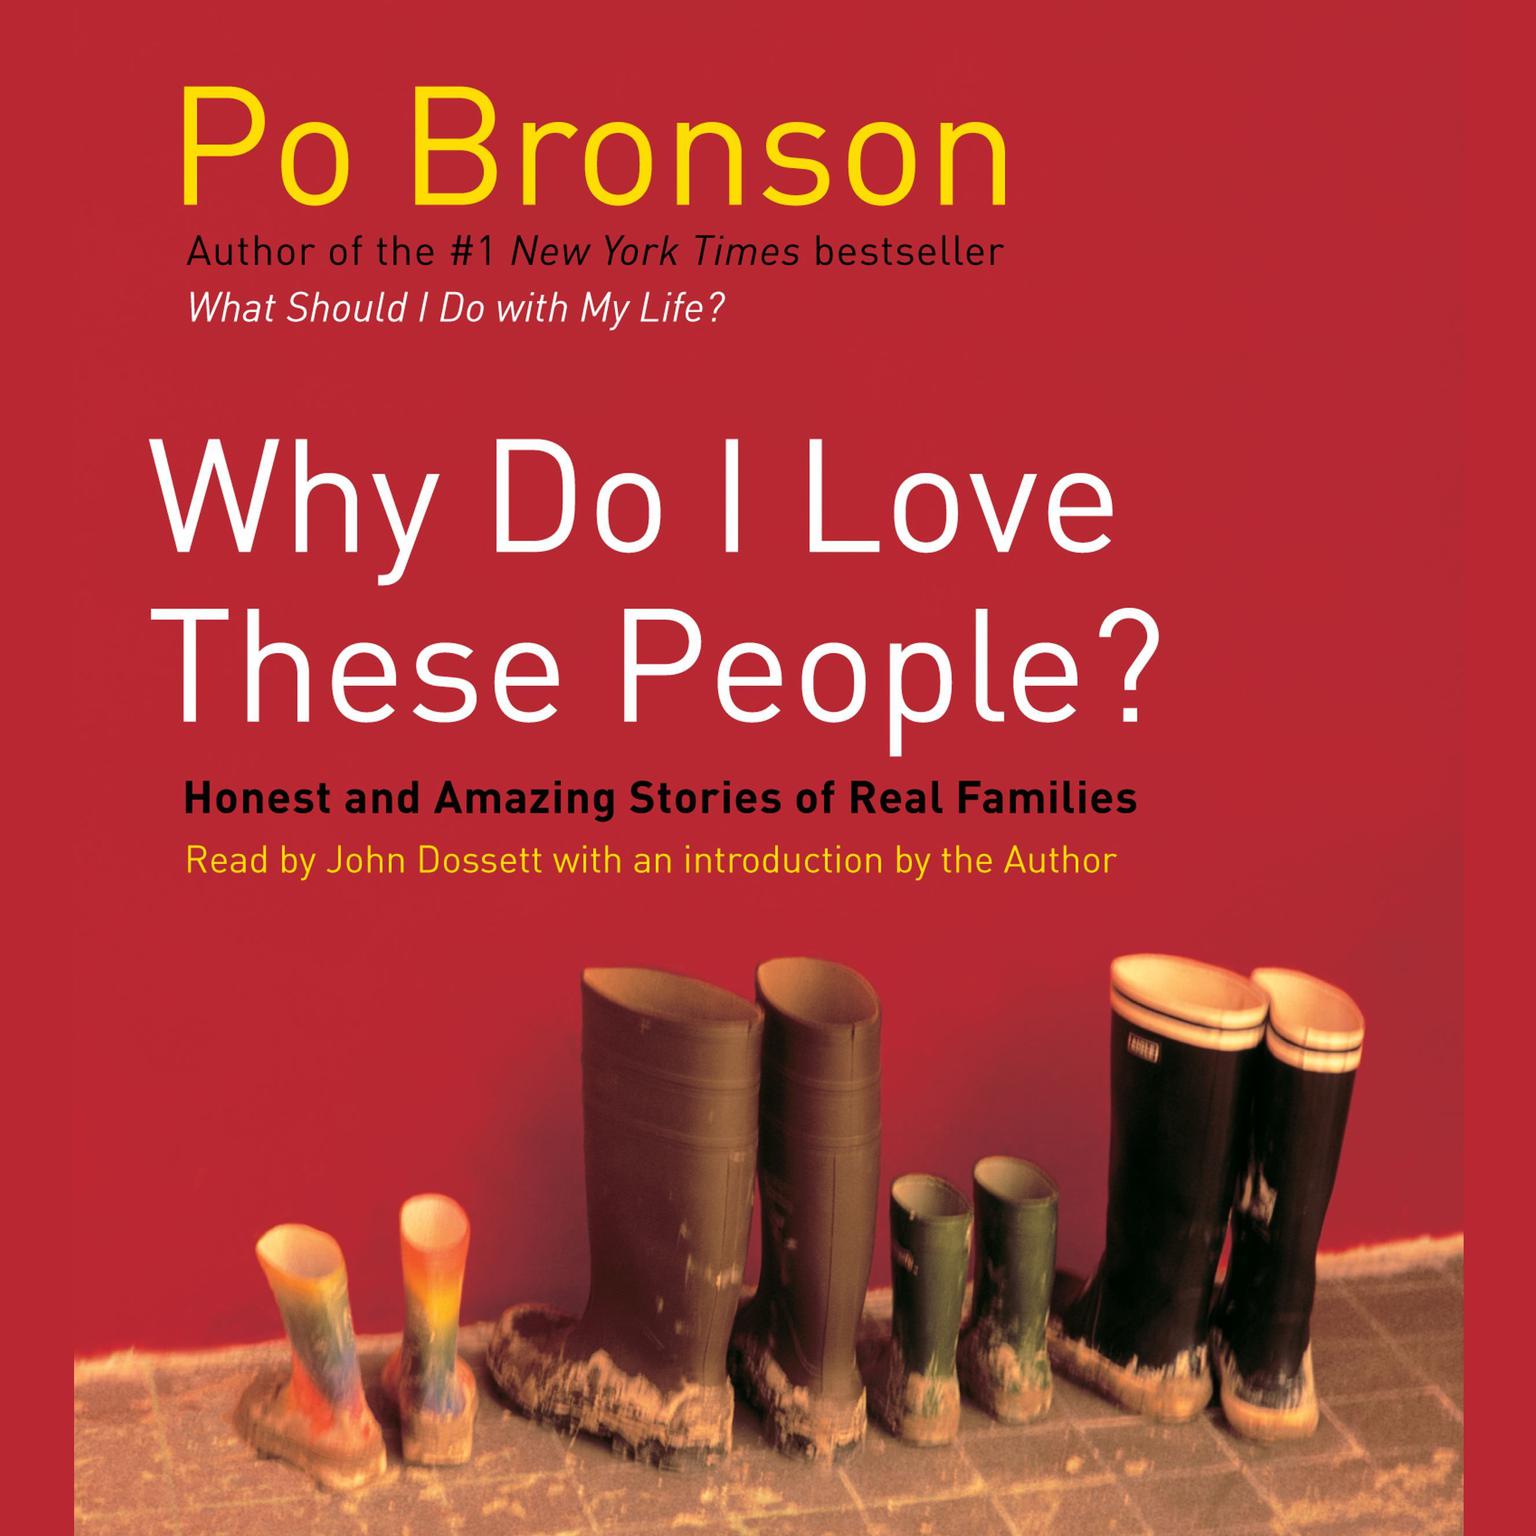 Why Do I Love These People? (Abridged): Miracalous Journeys of Twenty-first Century Families Audiobook, by Po Bronson